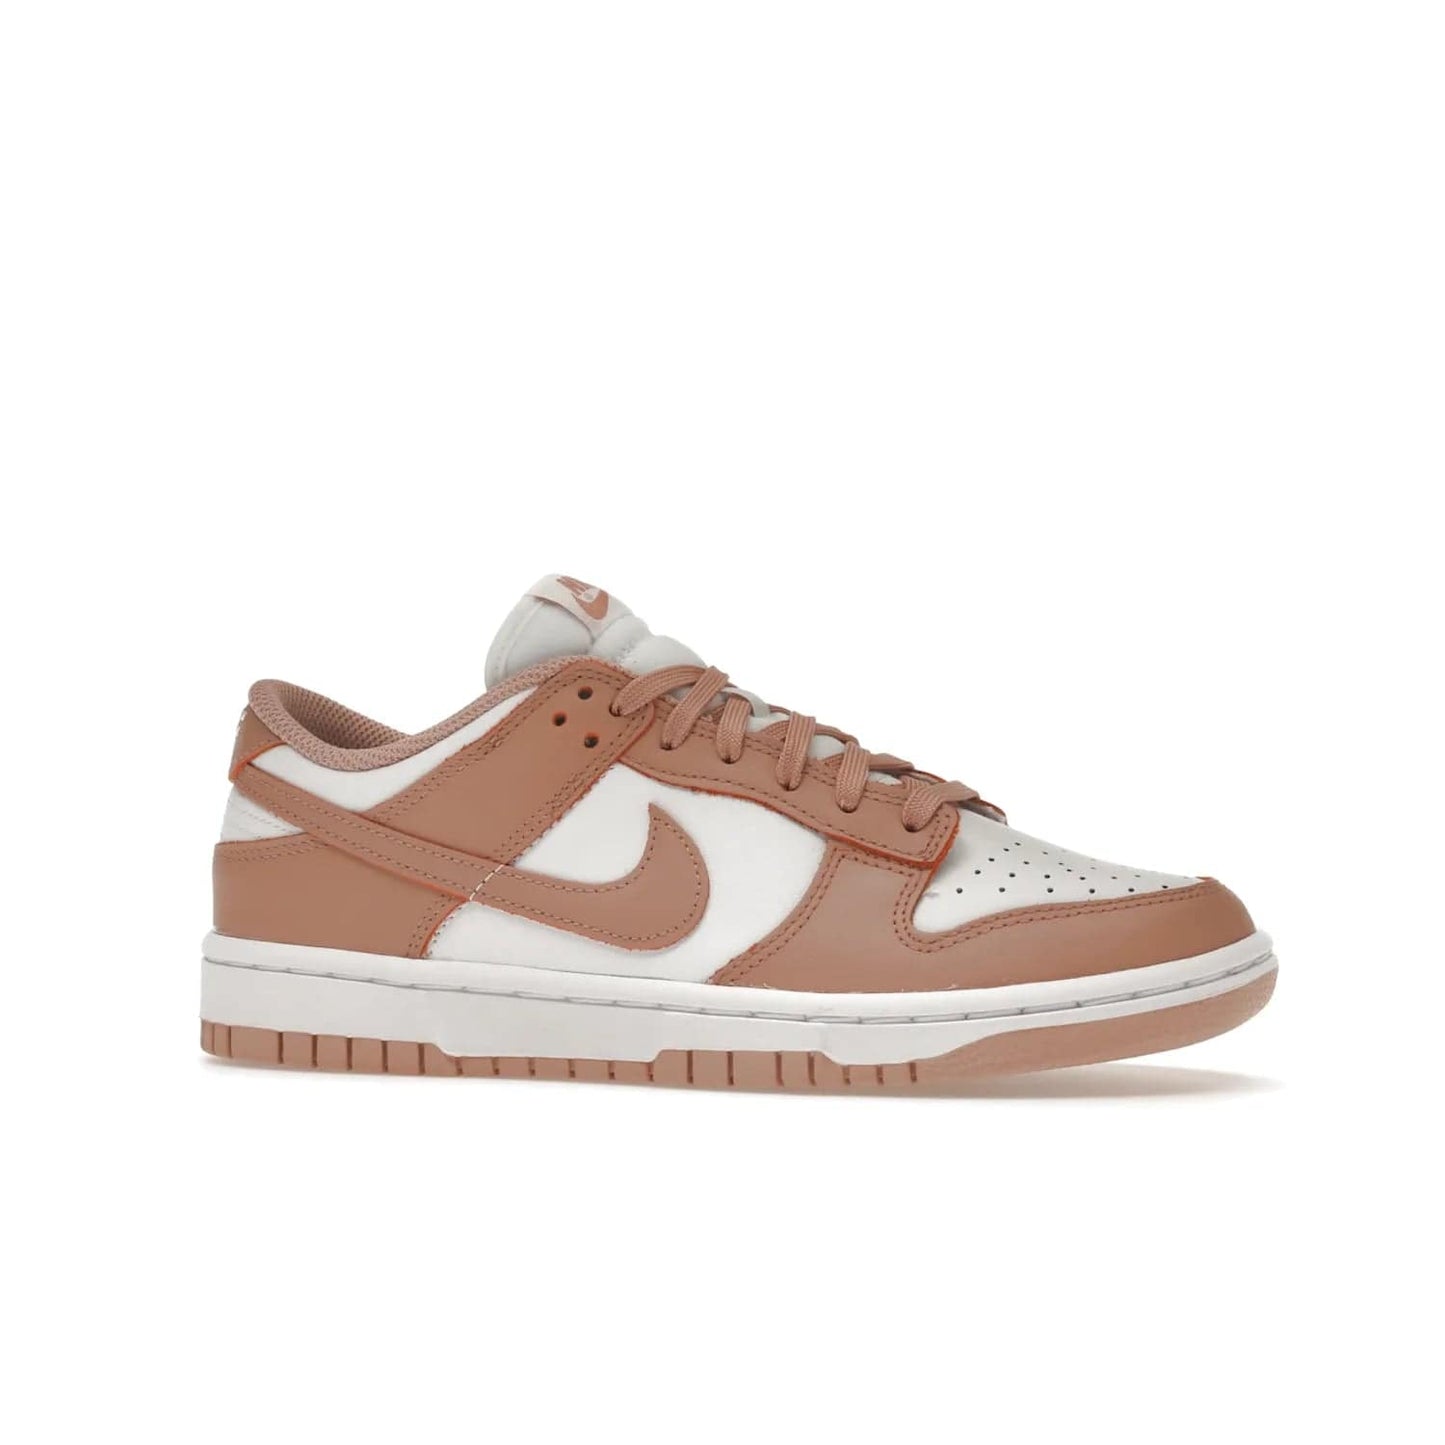 Nike Dunk Low Rose Whisper (Women's) - Image 3 - Only at www.BallersClubKickz.com - The Nike Dunk Low Rose Whisper is the perfect summer shoe with classic two-tone look and vintage-inspired design. Features white and Rose Whisper leather upper, woven tongue labels and EVA foam sole for plush cushioning. Available June 2022 at $100.